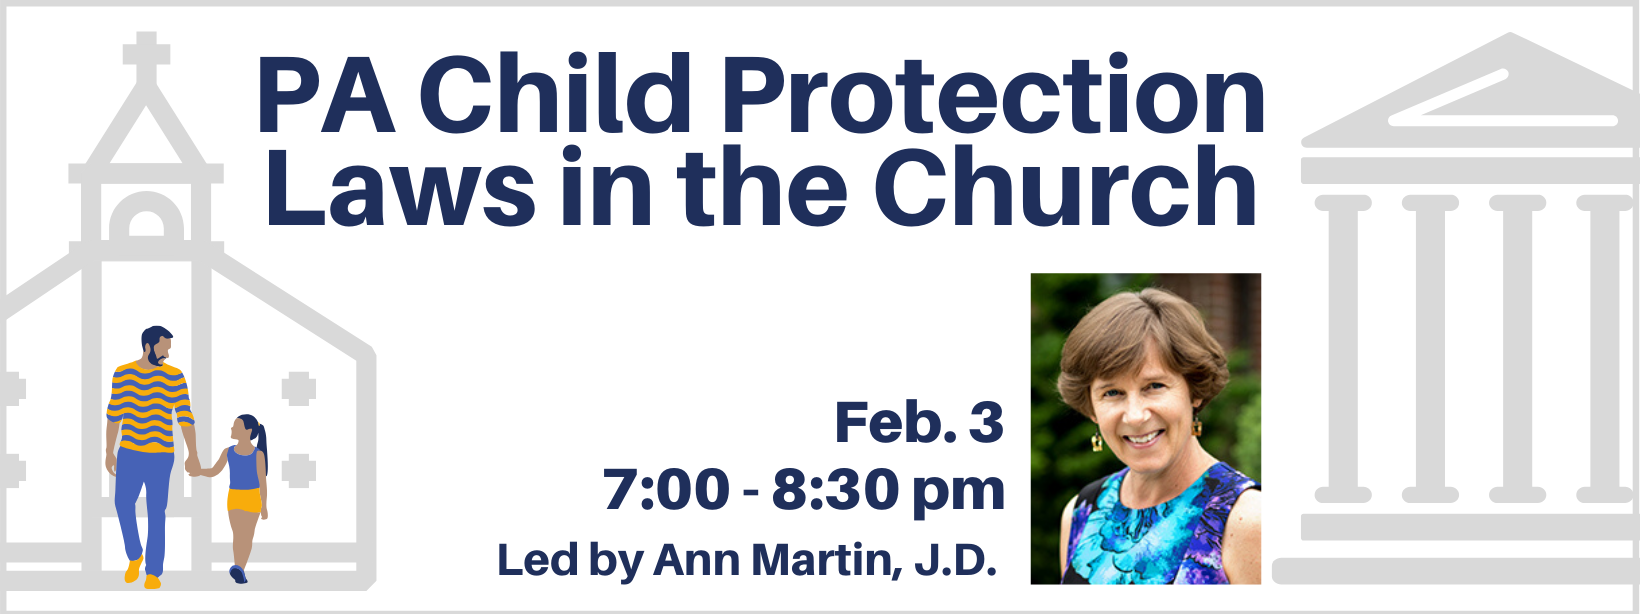 PA Child Protection Laws in the Church